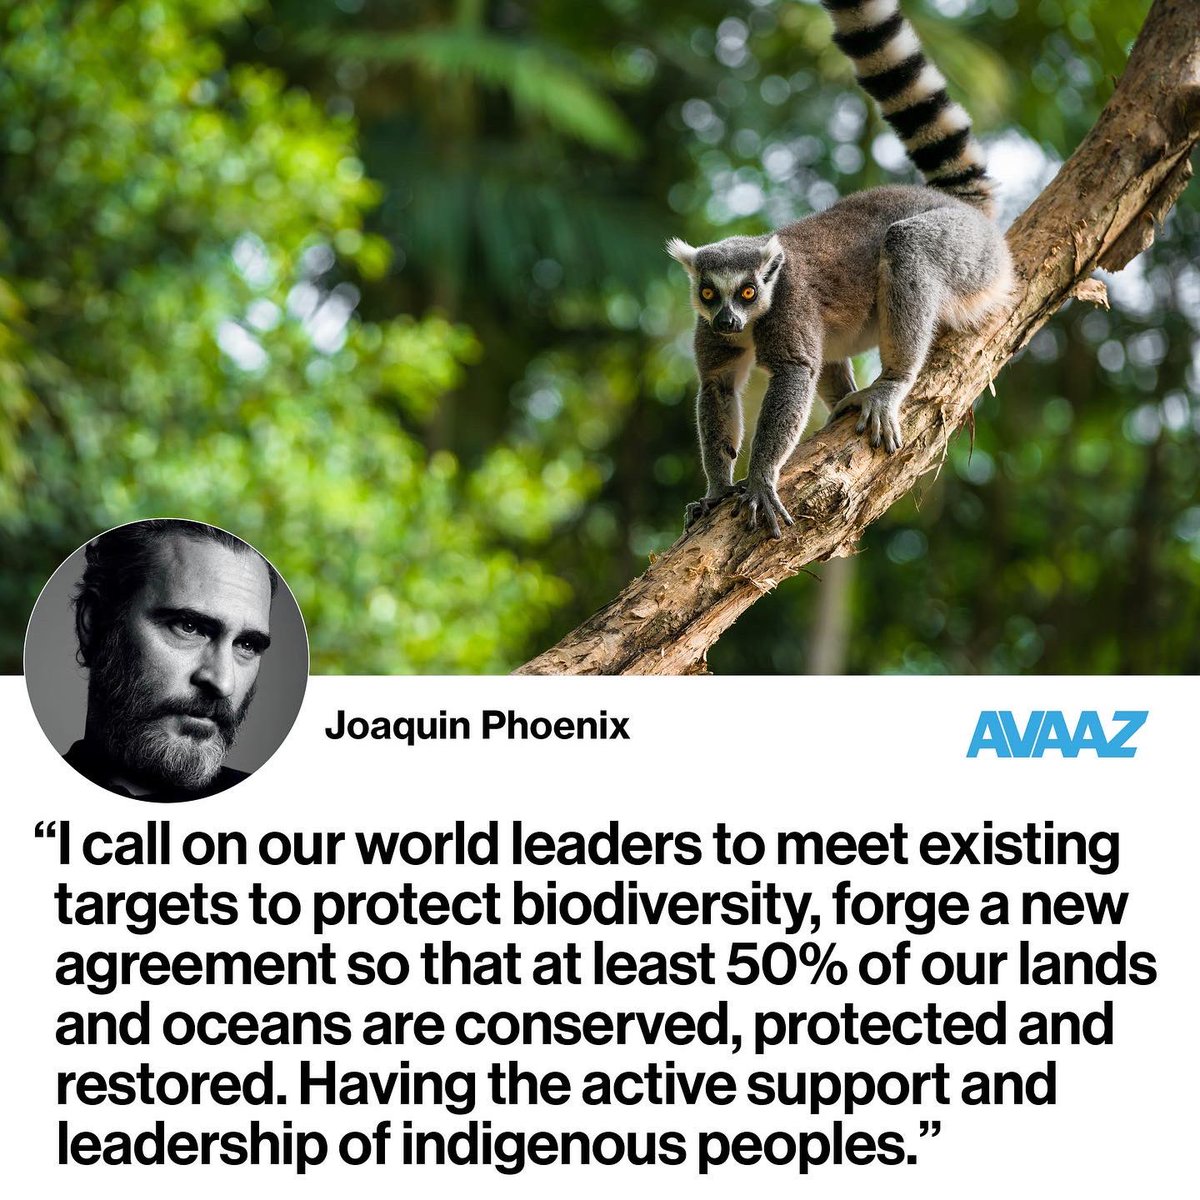 Joaquin Phoenix has endorsed a new petition aimed at UN delegates asking them to follow science and conserve and restore at least 50% of our Planet.
#NatureNeedsHalf @Avaaz #COP15

Sign your name: avaaz.org/50x2030